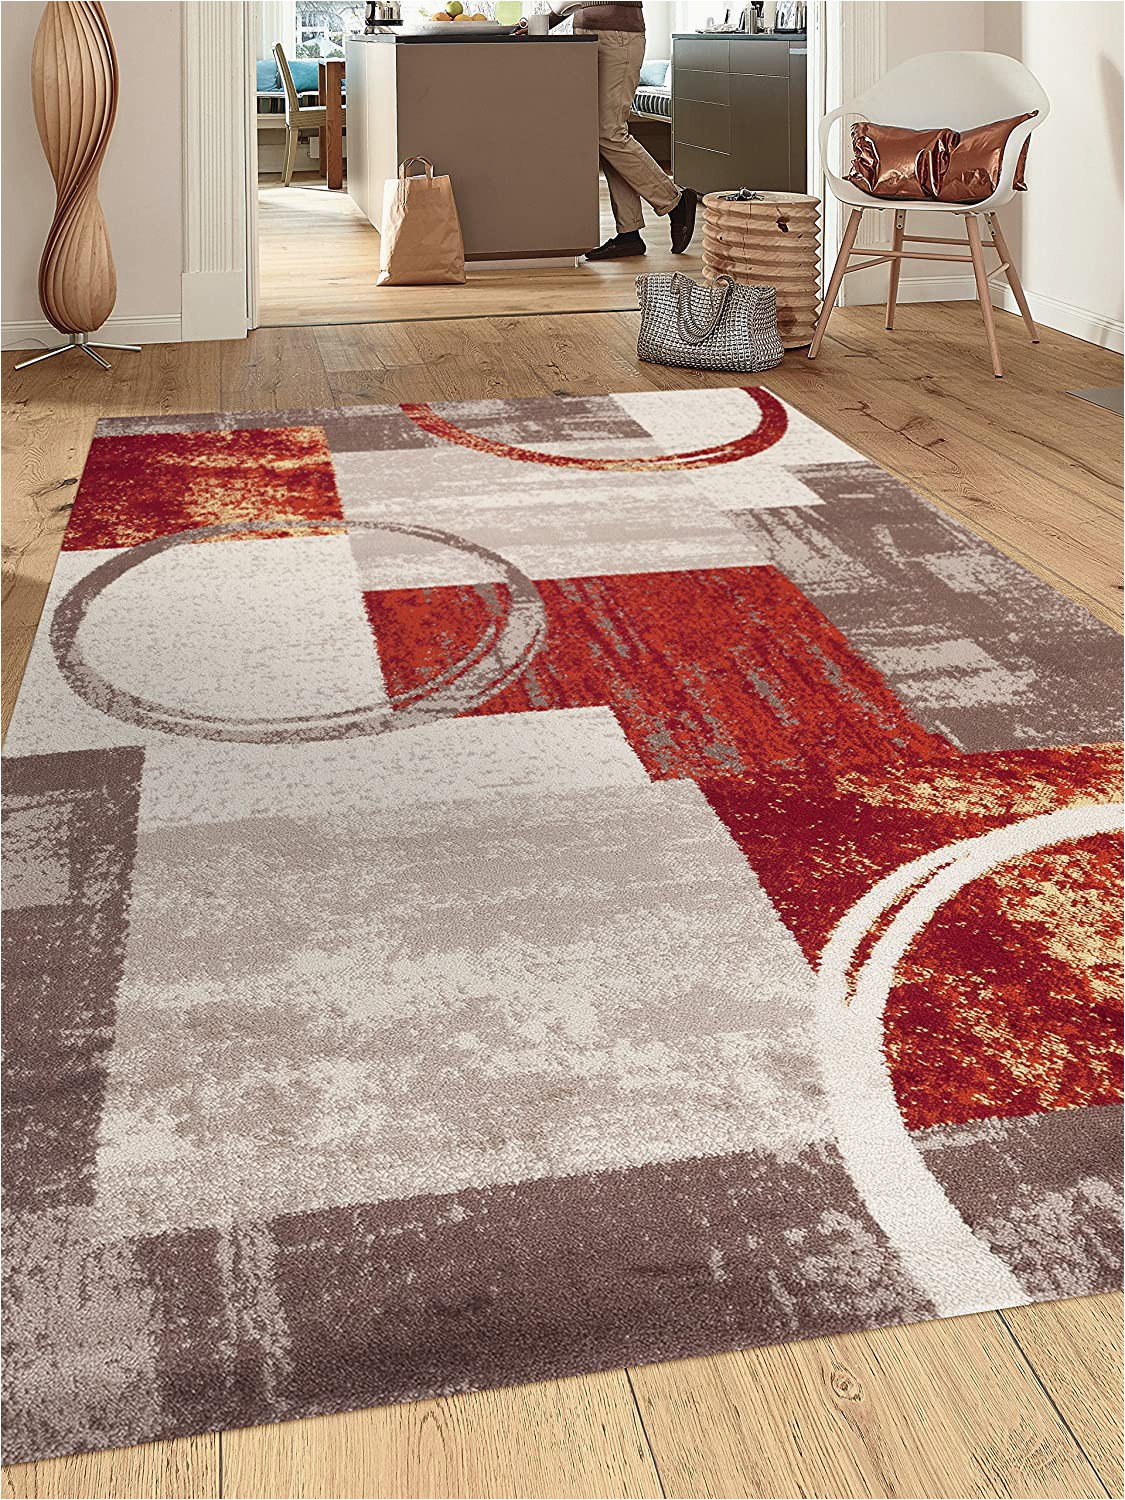 Area Rug Edges Curling Up Contemporary Abstract Circle Design Multi soft 5 3" X 7 3" Indoor area Rug